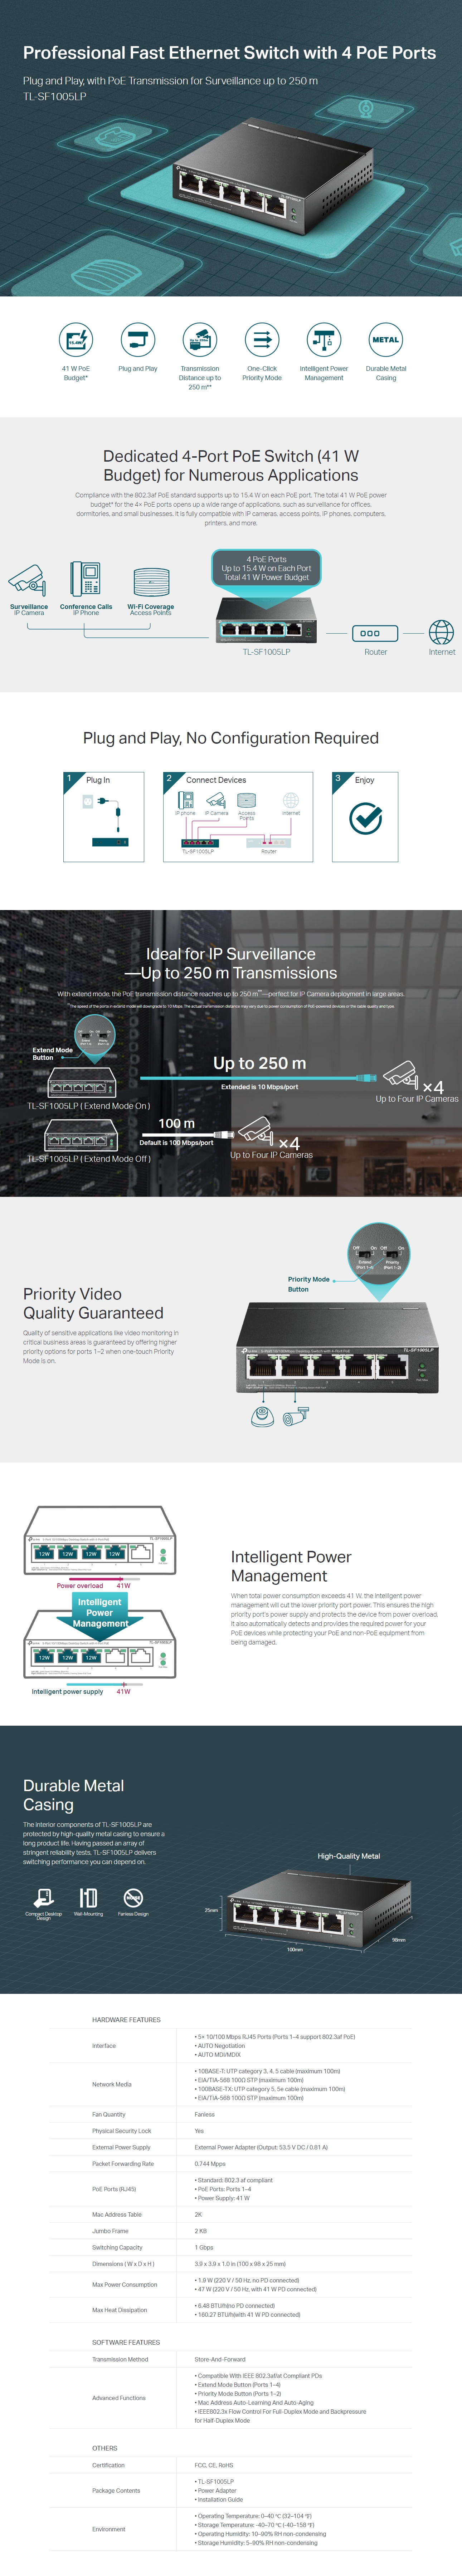 A large marketing image providing additional information about the product TP-Link SF1005LP - 5-Port 10/100Mbps Desktop Switch with 4-Port PoE - Additional alt info not provided